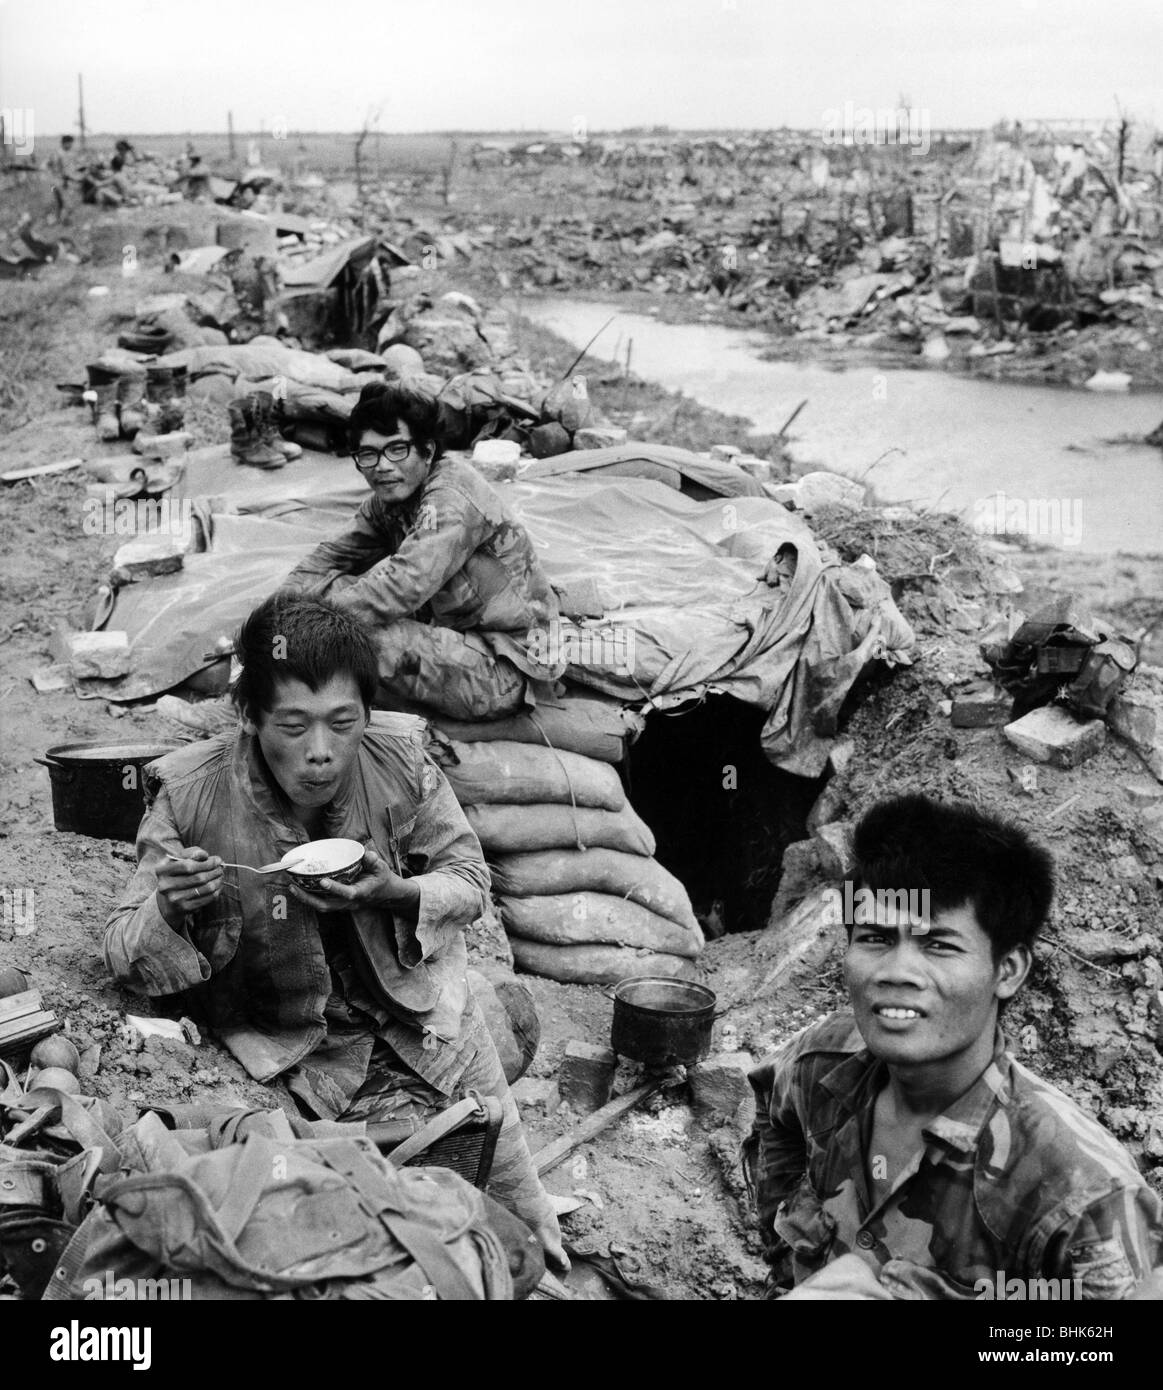 events, Vietnam War, South Vietnamese soldiers in the destroyed town of Quang Tri, September 1972, Stock Photo